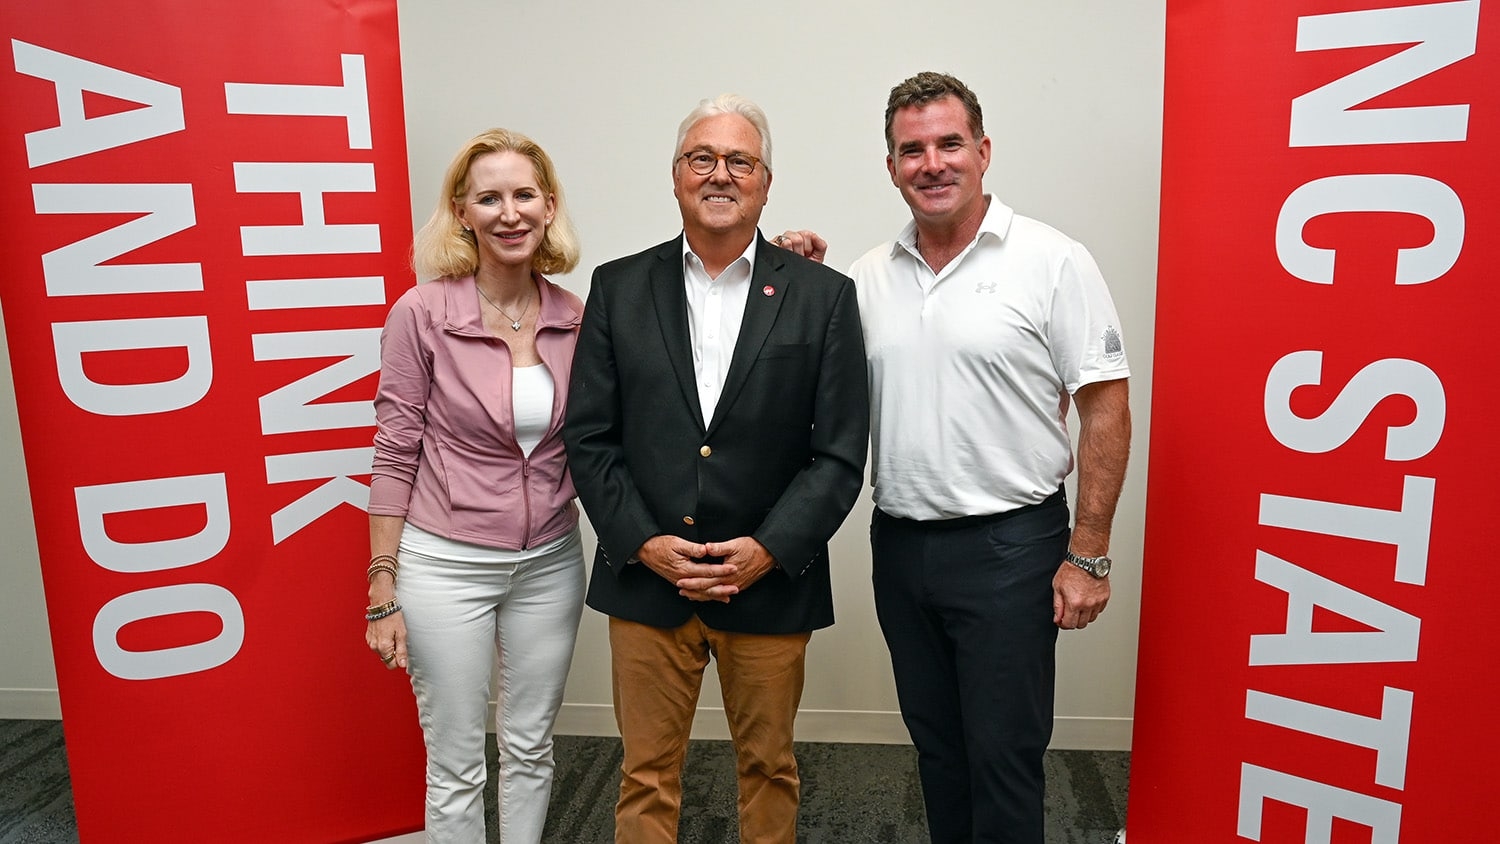 Chancellor Woodson of NC State poses with the Under Armour founder and the Under Armour CEO.